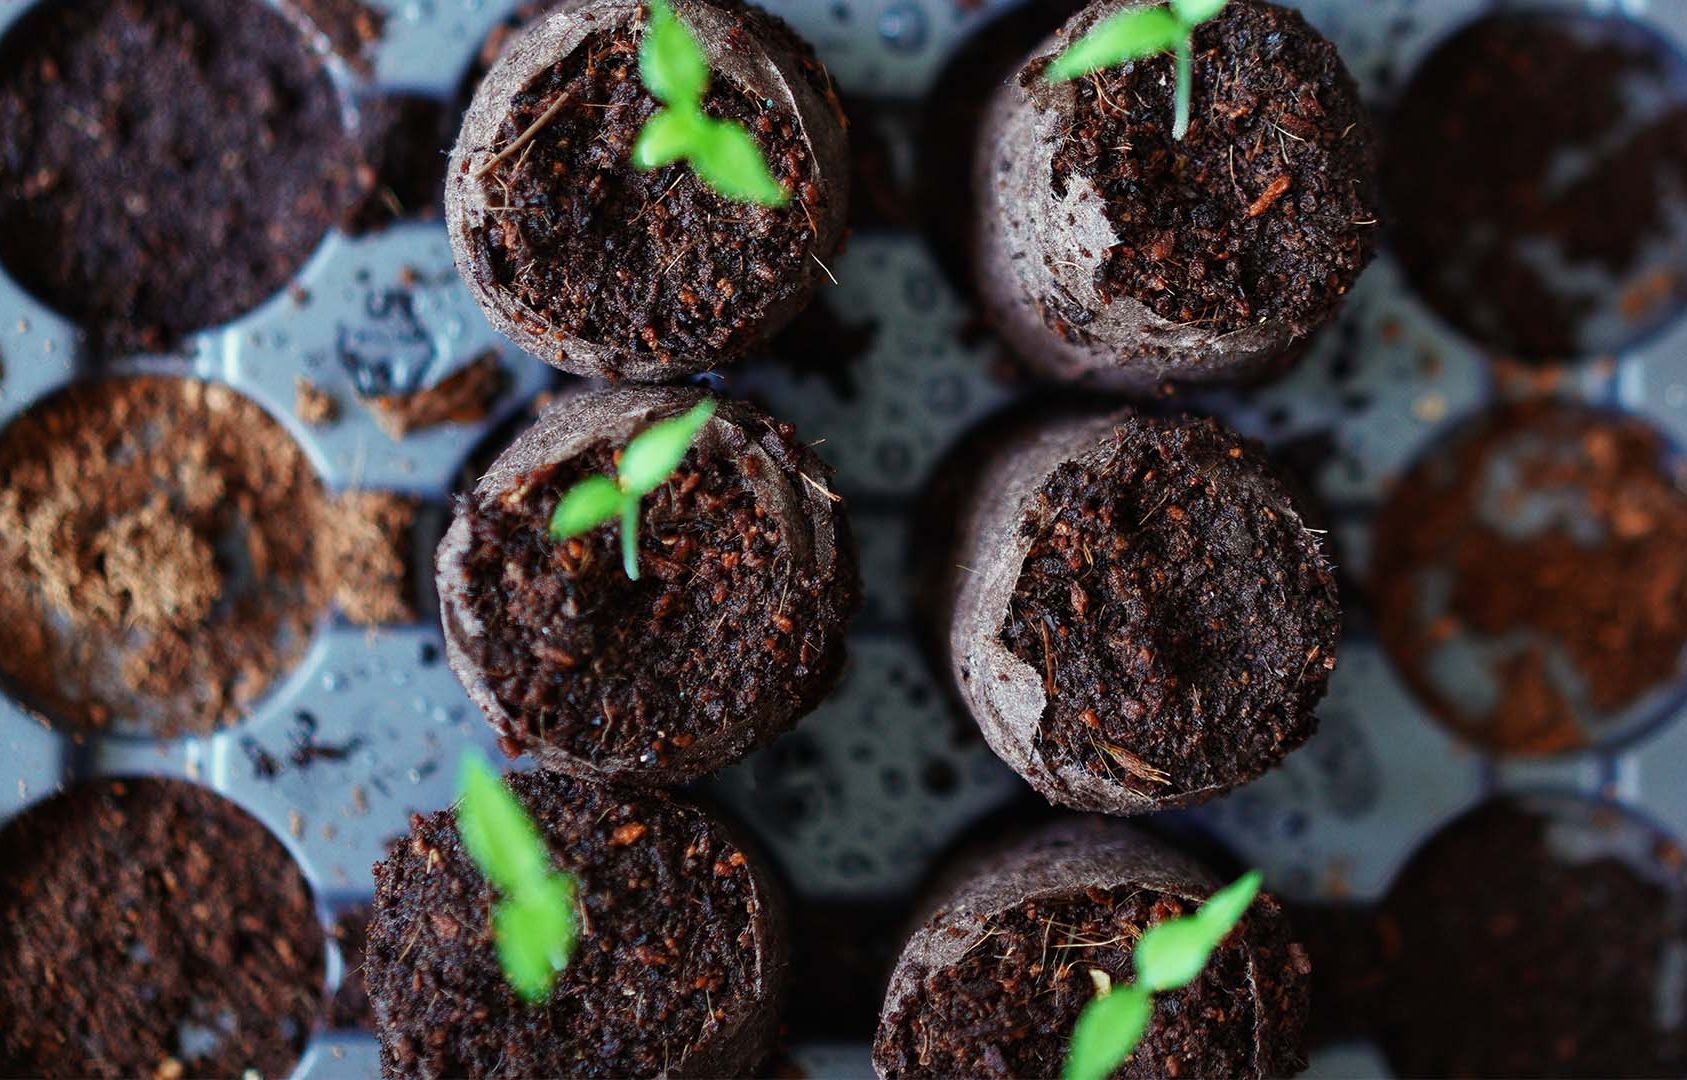 How-to-sow-seeds-for-vegetables